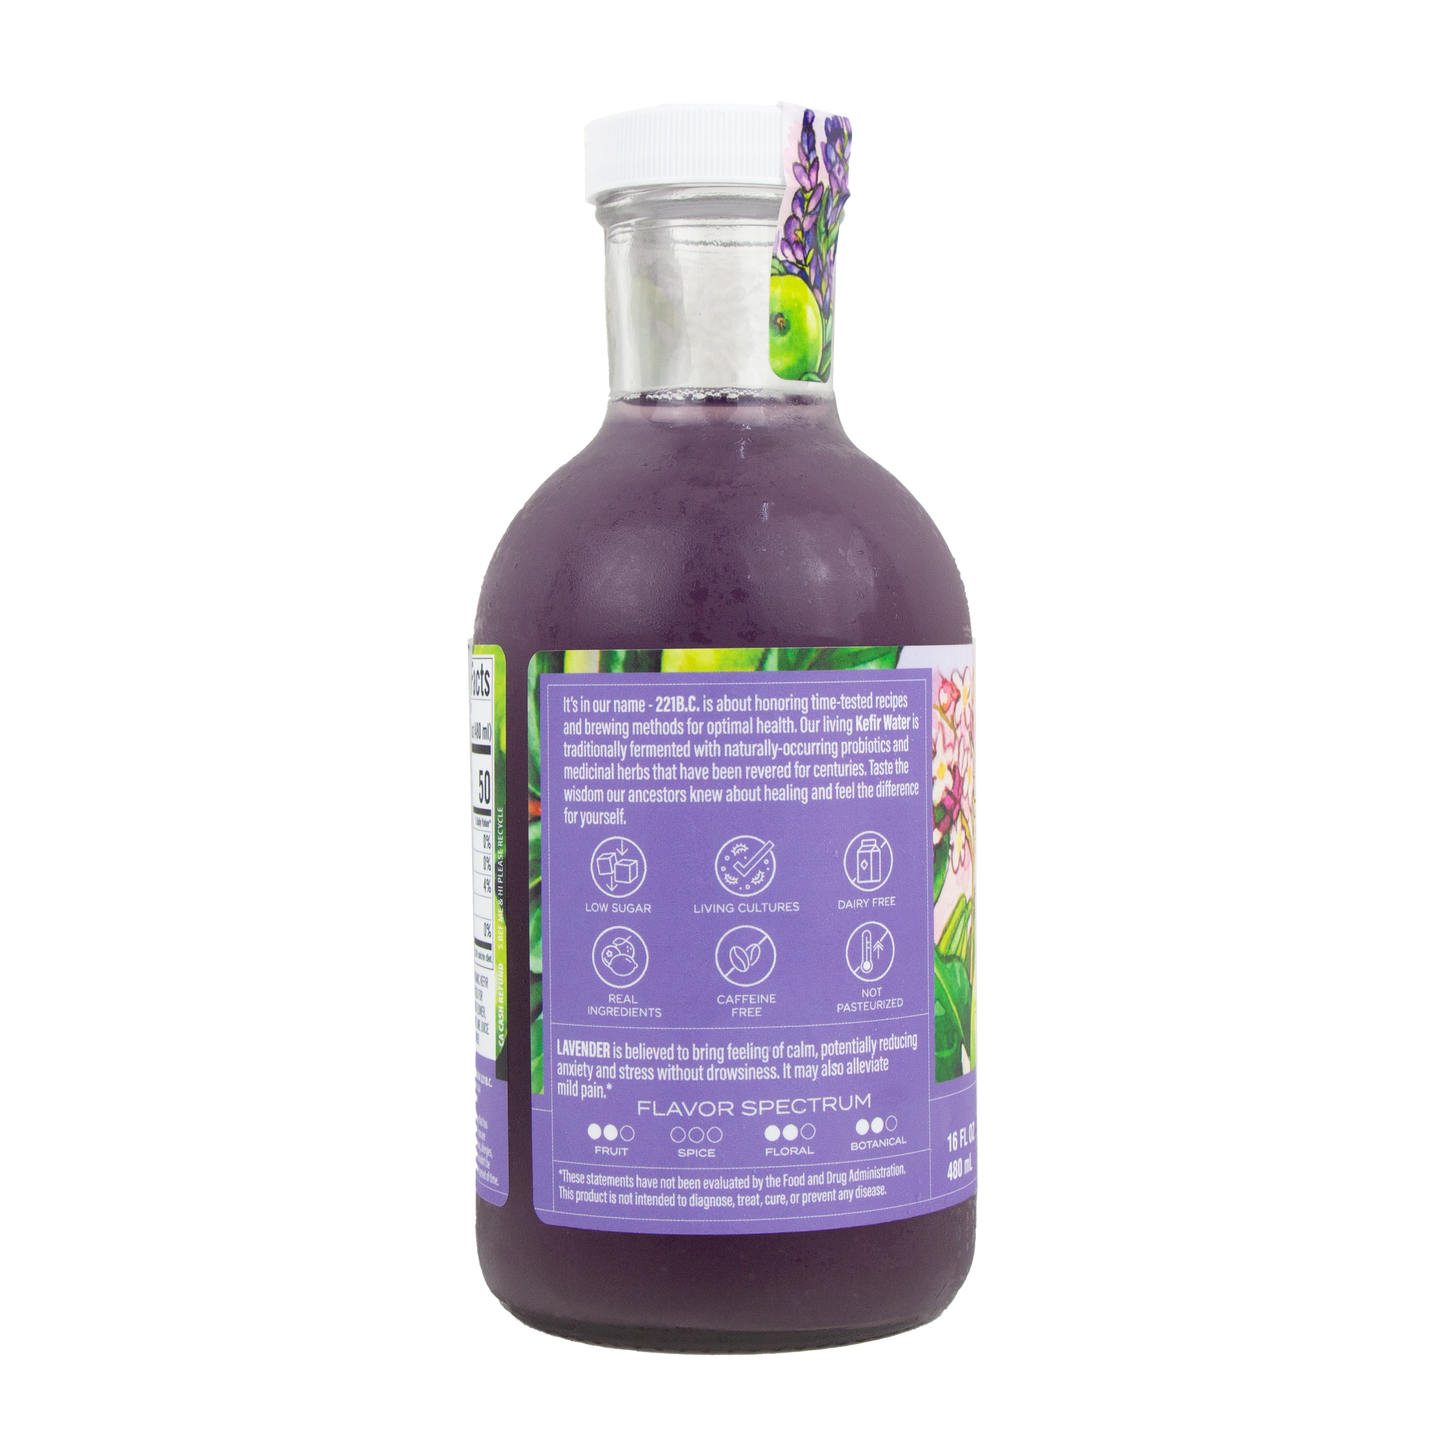 221Bc Kerif Water - Lavender Limeade Kefir Water (In Store Pick-Up Only)